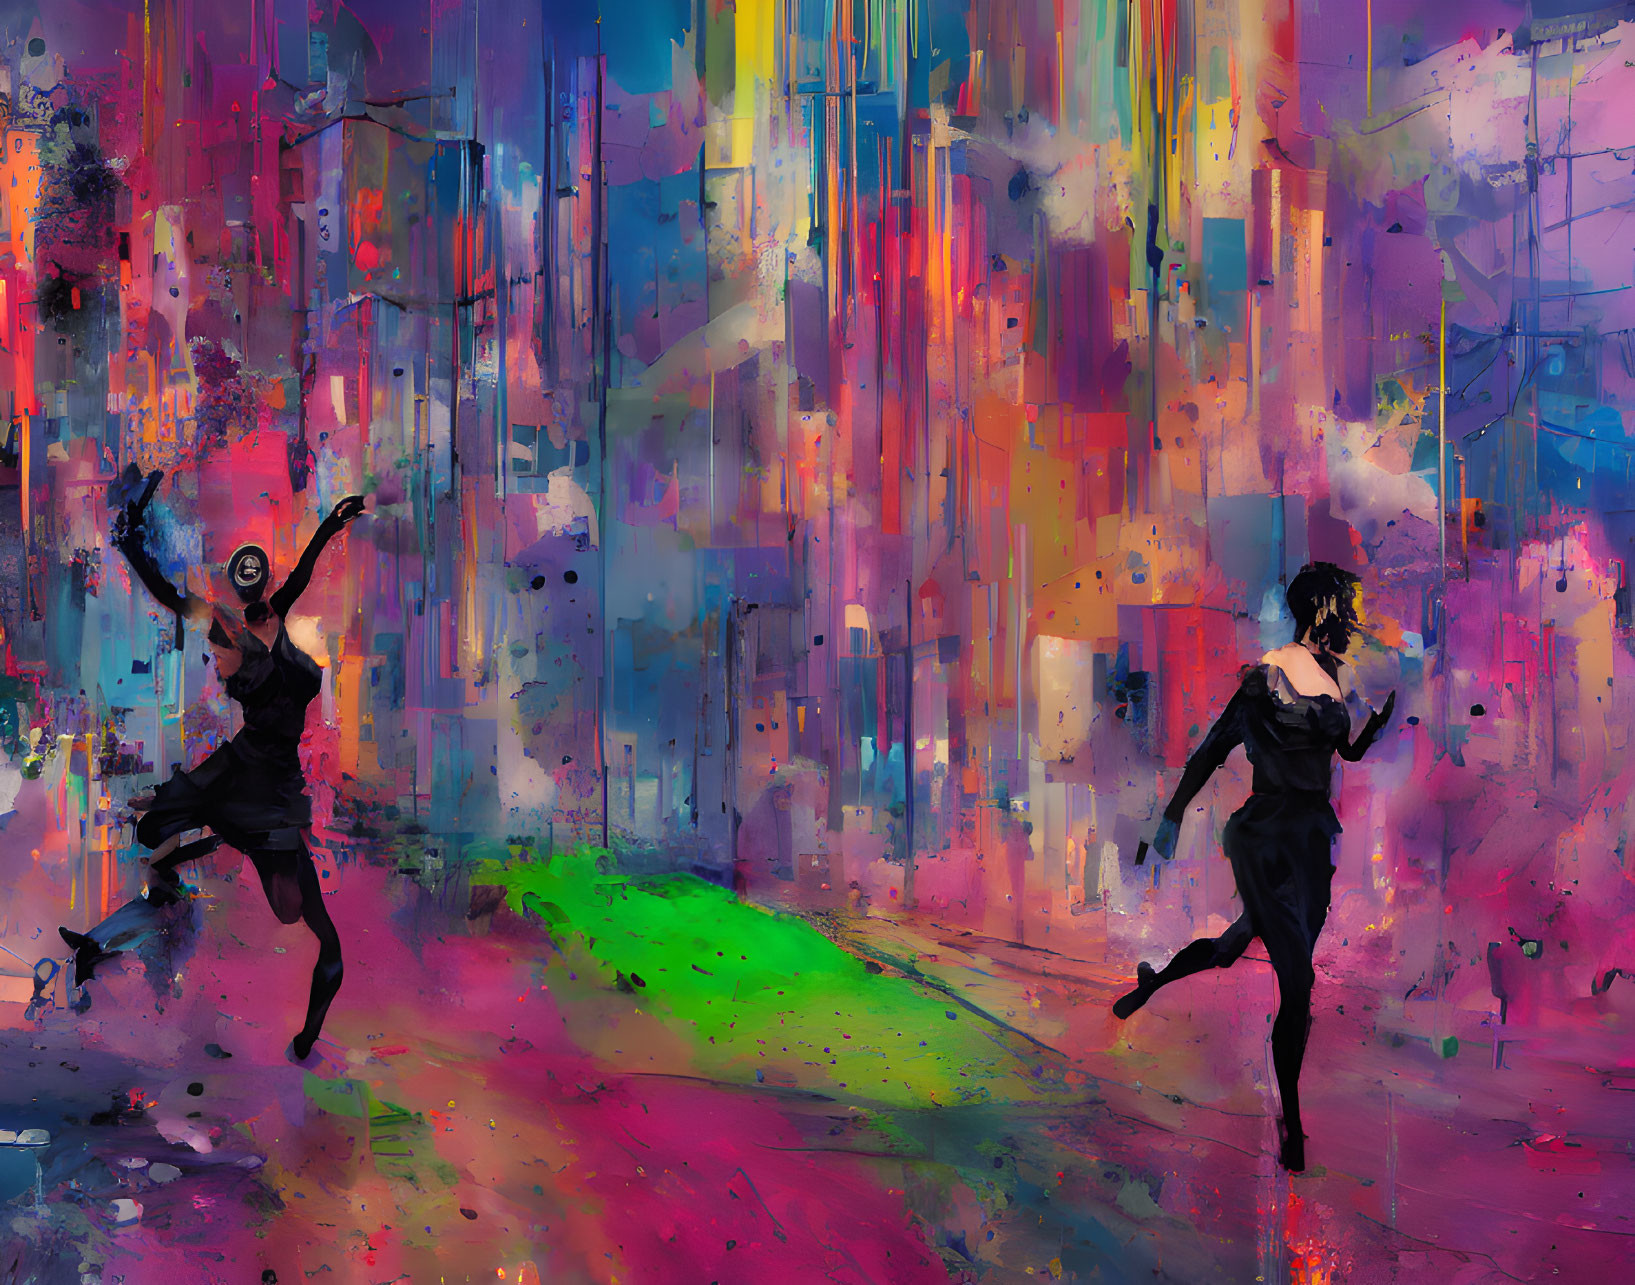 Silhouetted figures dancing in vibrant, colorful paint splashes